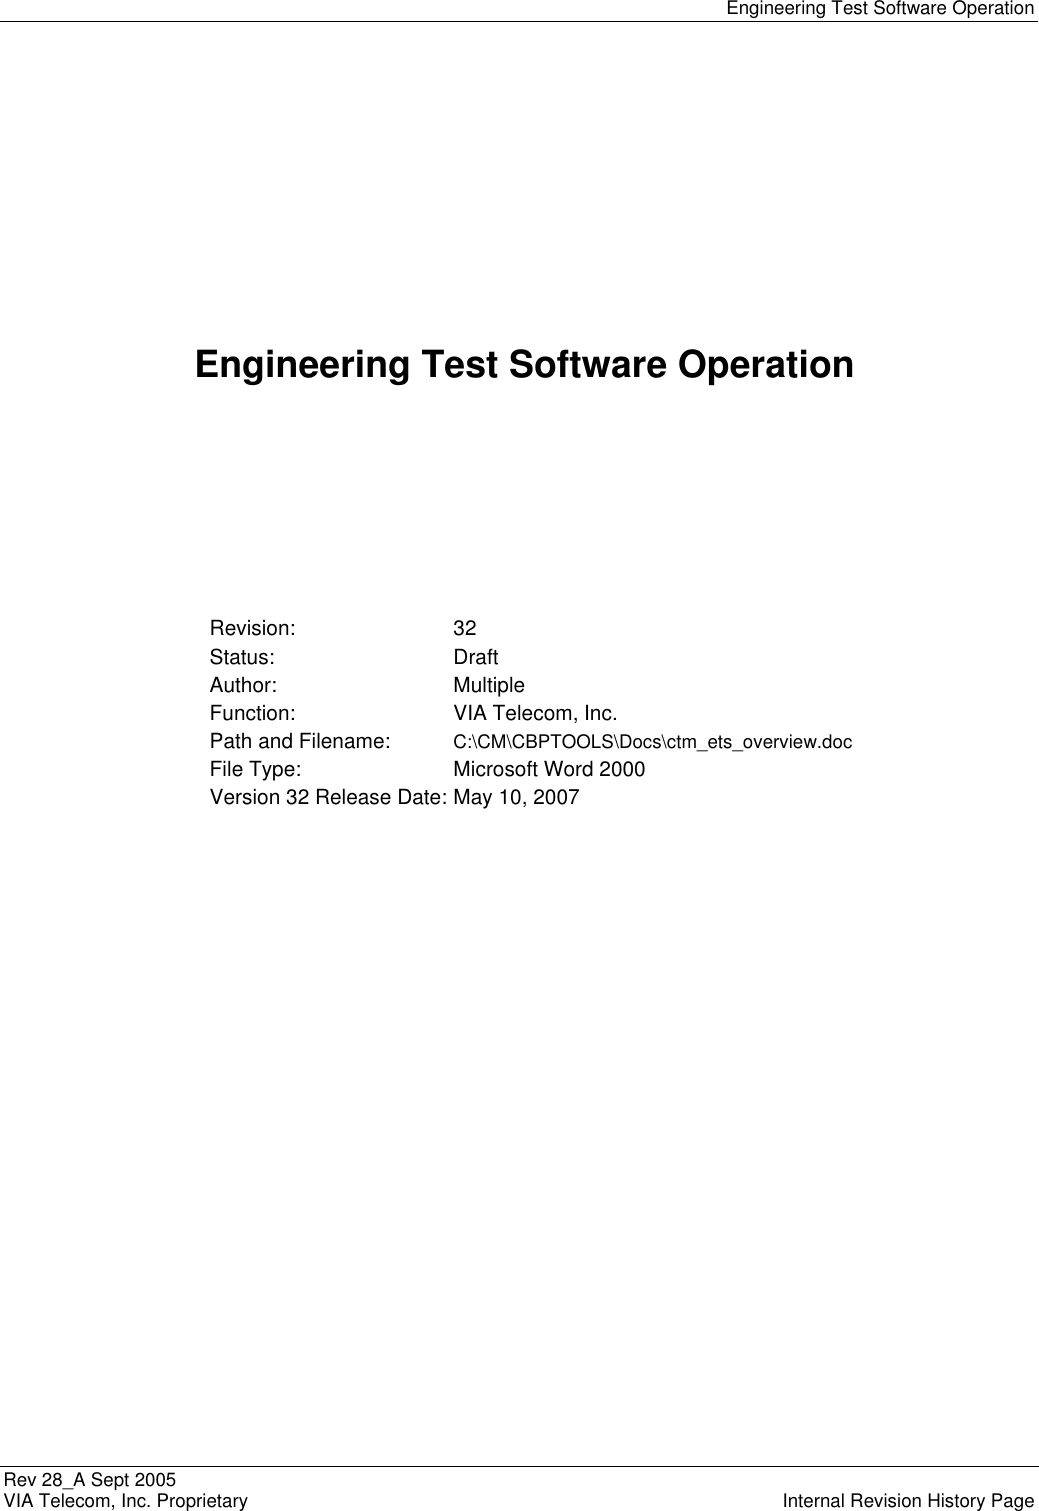   Engineering Test Software Operation Rev 28_A Sept 2005    VIA Telecom, Inc. Proprietary    Internal Revision History Page        Engineering Test Software Operation       Revision:  32 Status:  Draft Author:  Multiple Function:  VIA Telecom, Inc. Path and Filename:  C:\CM\CBPTOOLS\Docs\ctm_ets_overview.doc File Type:  Microsoft Word 2000 Version 32 Release Date: May 10, 2007  